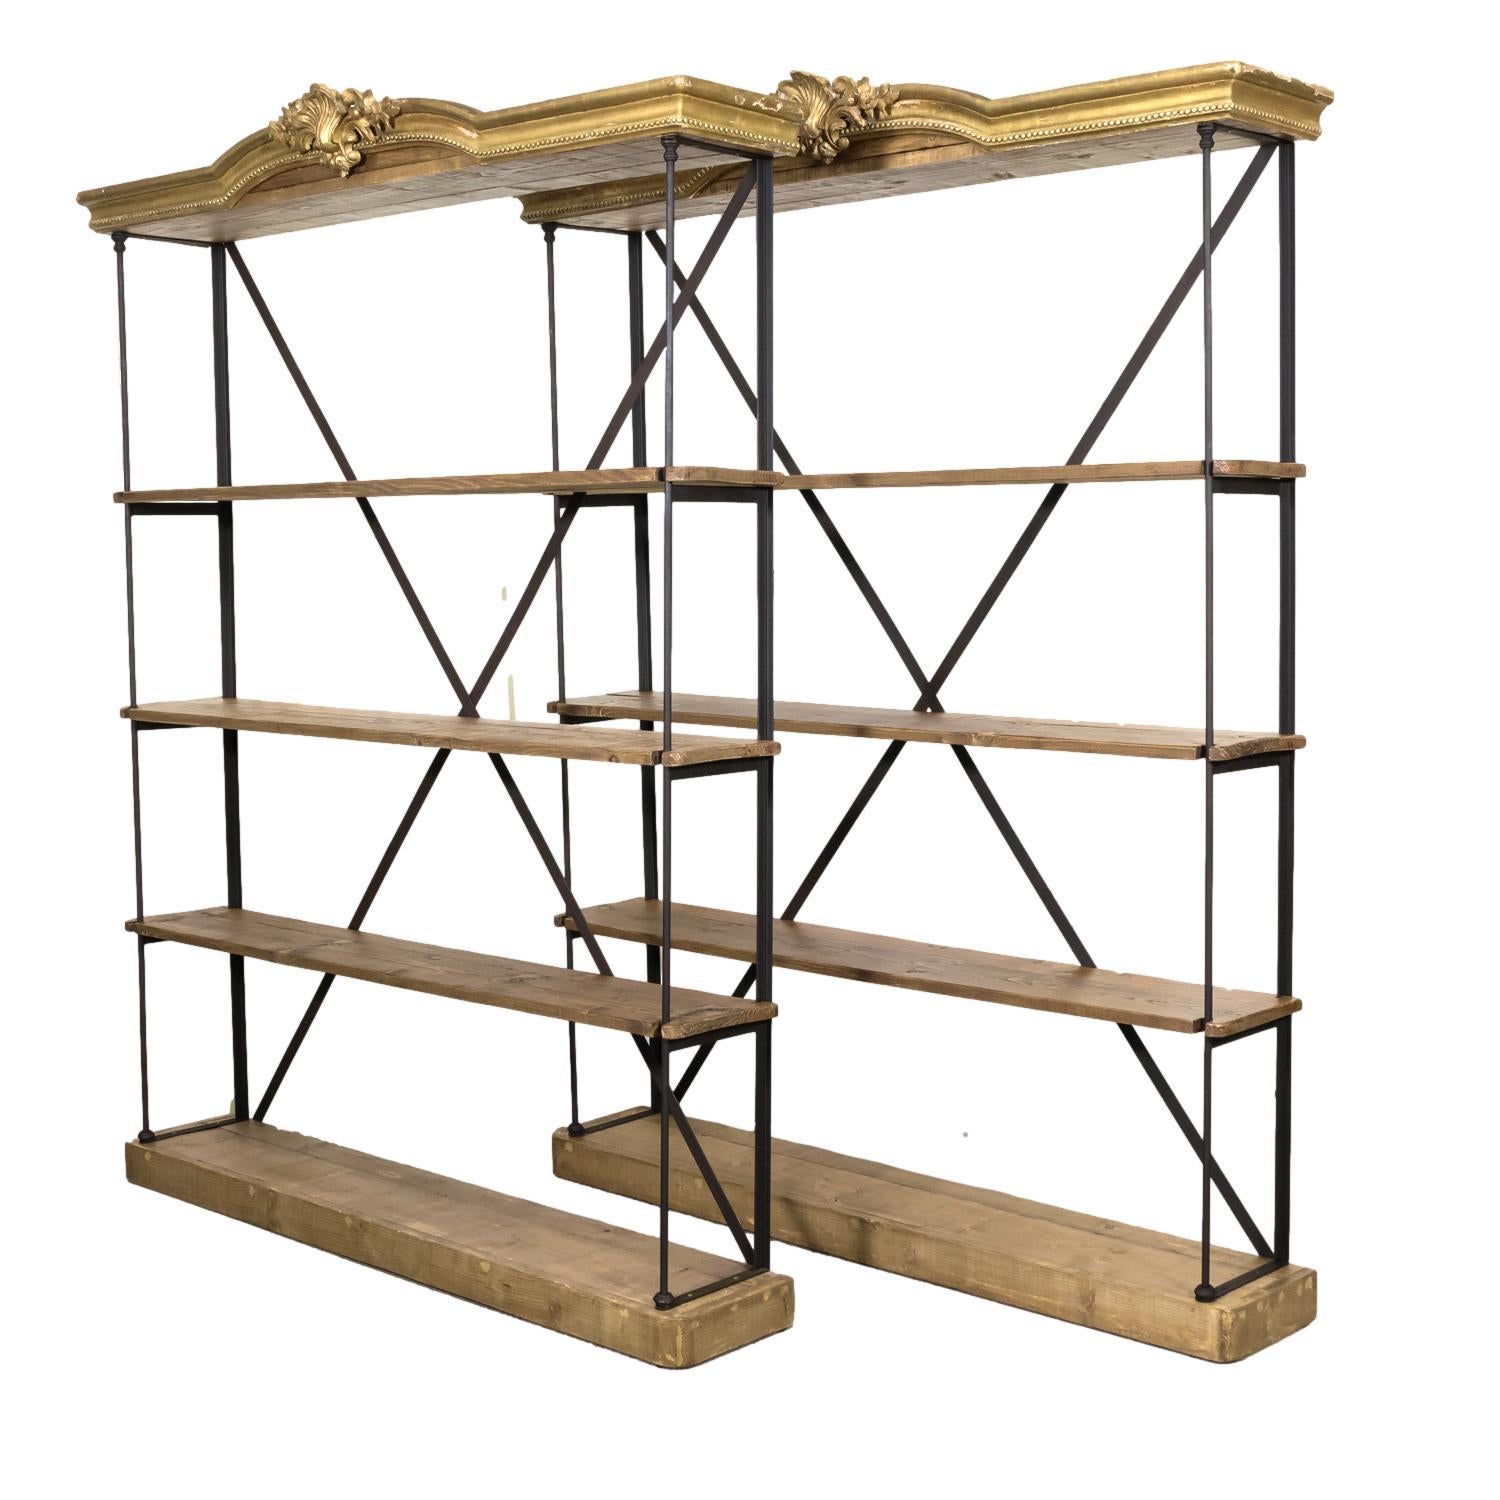 A stunning pair of tall and impressive French industrial style artist's shelves or display shelves newly handcrafted by a talented and creative French artisan we discovered in Provence that blends elements of industrial design with classic French